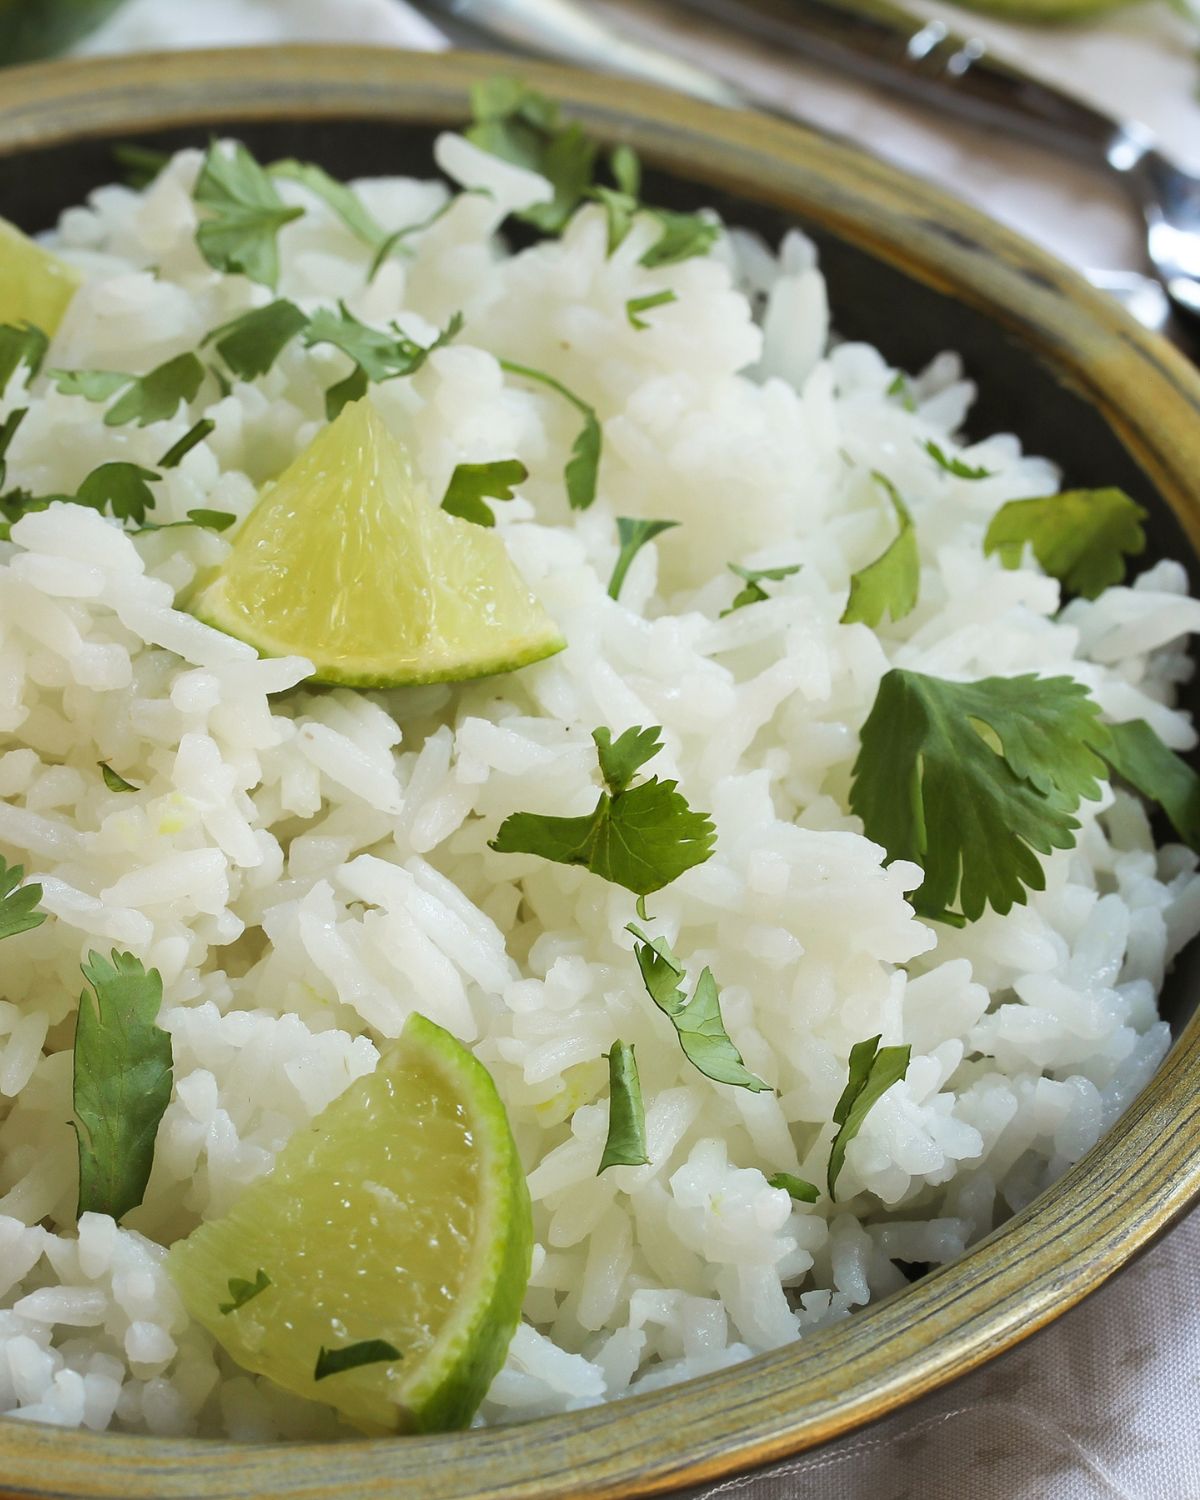 A finished bowl of the copycat chipotle lime rice.